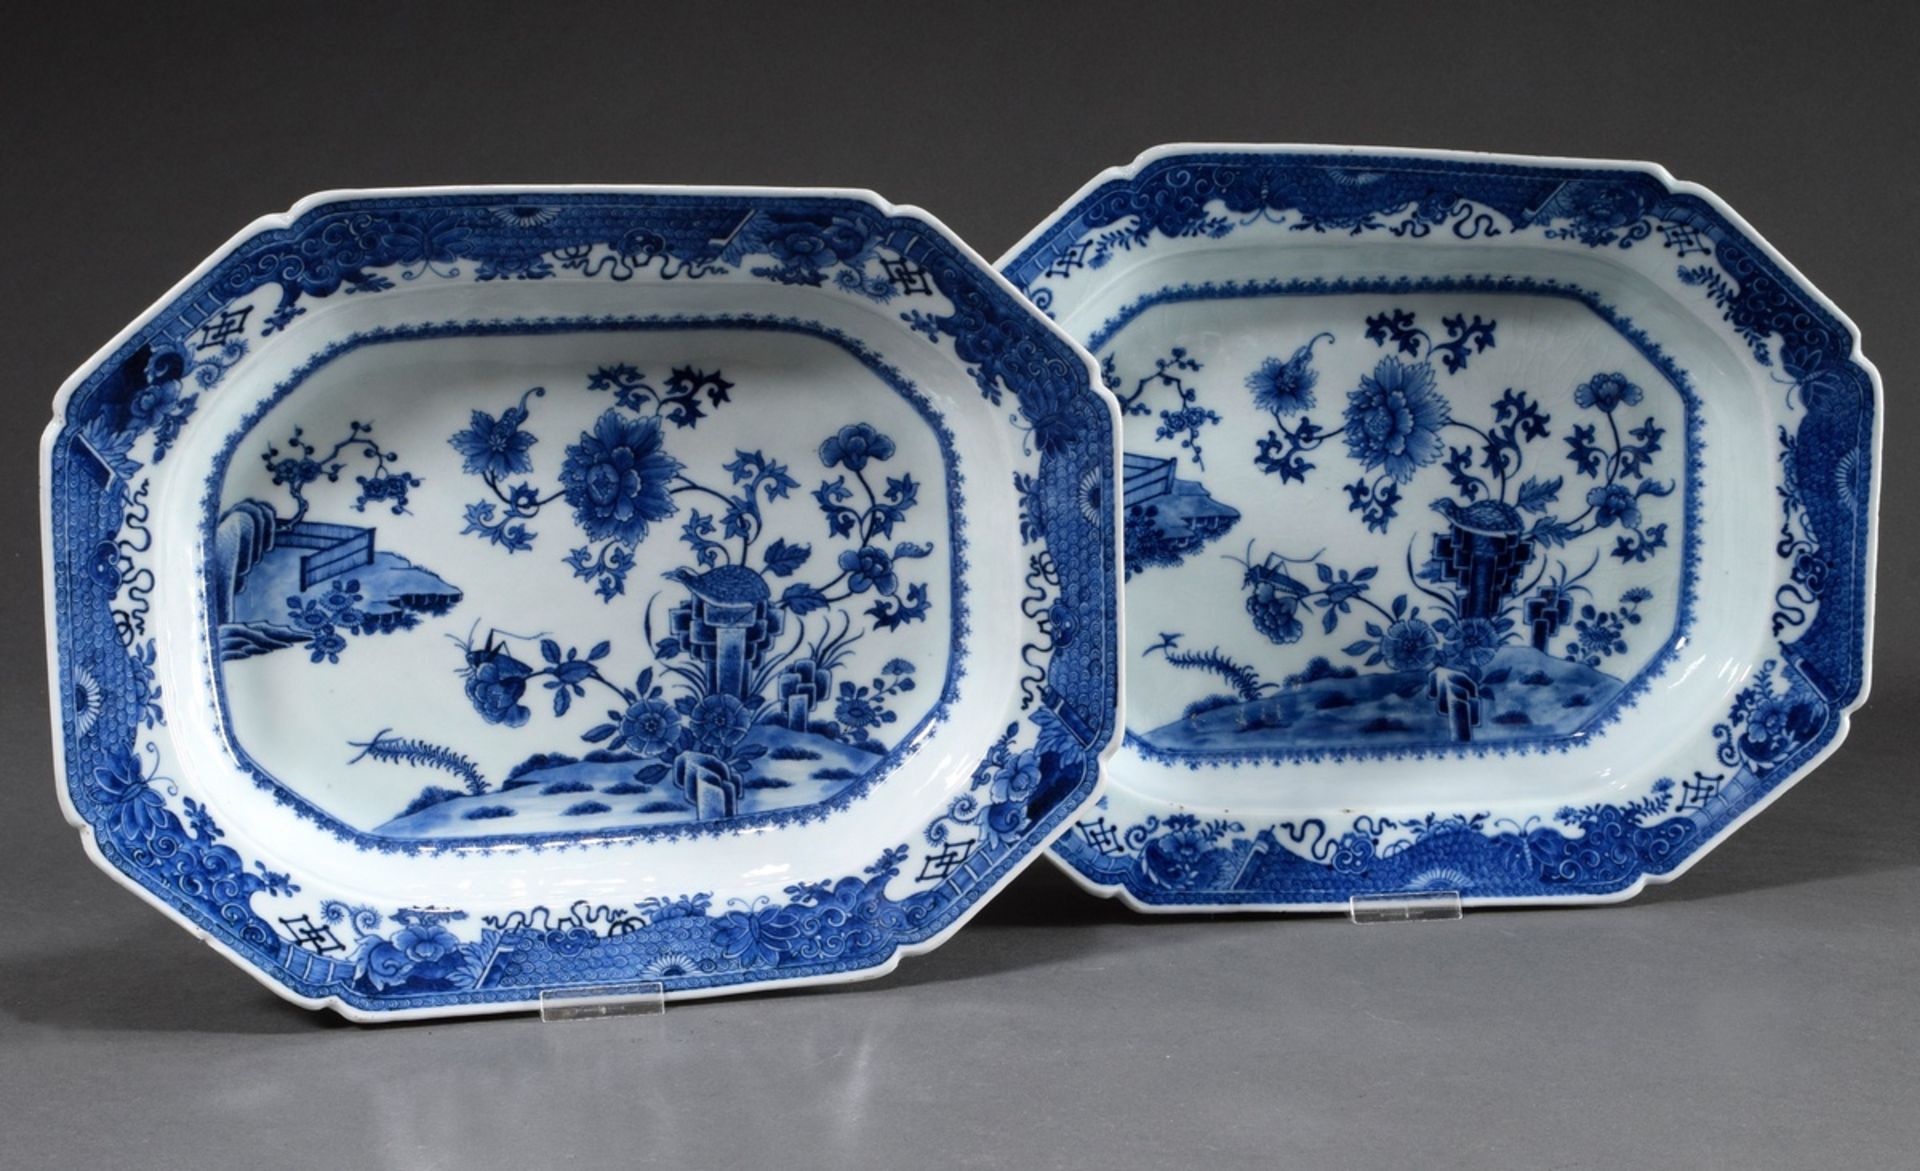 Pair of deeply moulded octagonal plates with fine blue painting decoration "Garden with Partridge a